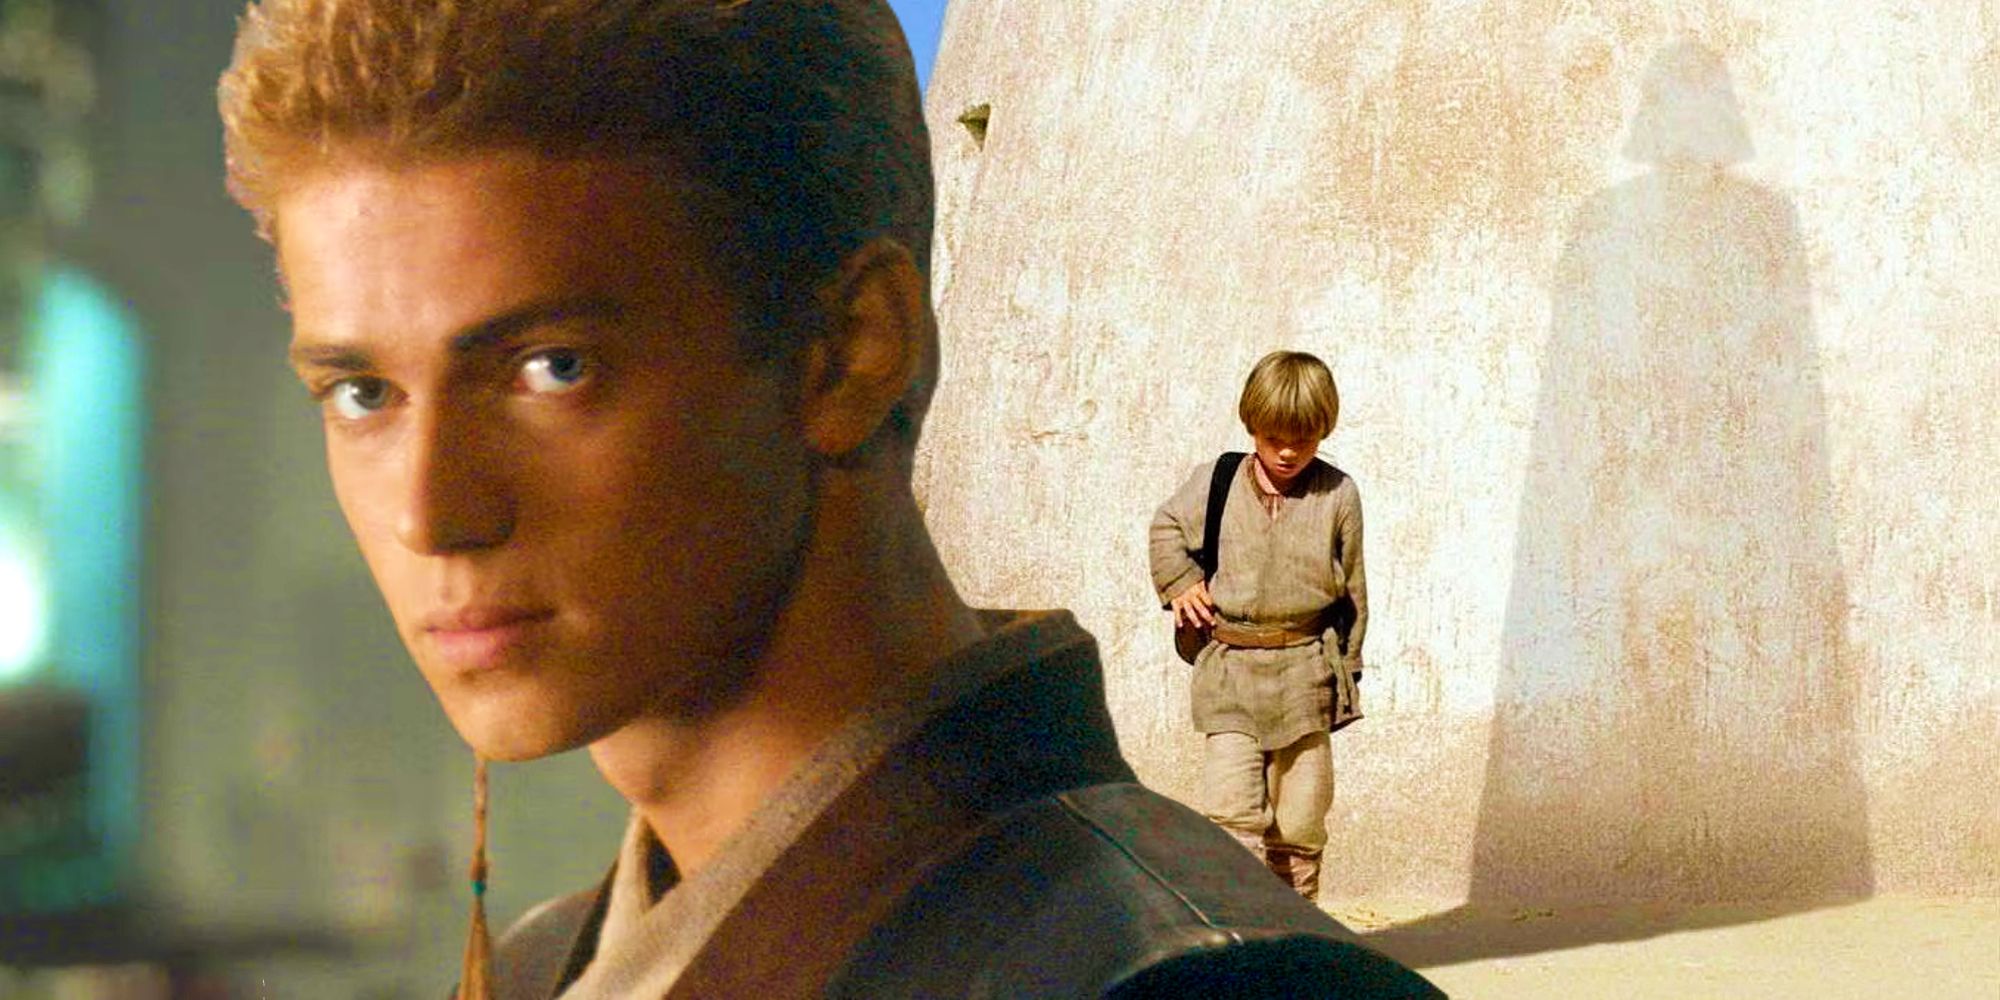 Jake Lloyd as Anakin Skywalker in the poster for The Phantom Menace next to Hayden Christensen as Anakin from Attack of the Clones